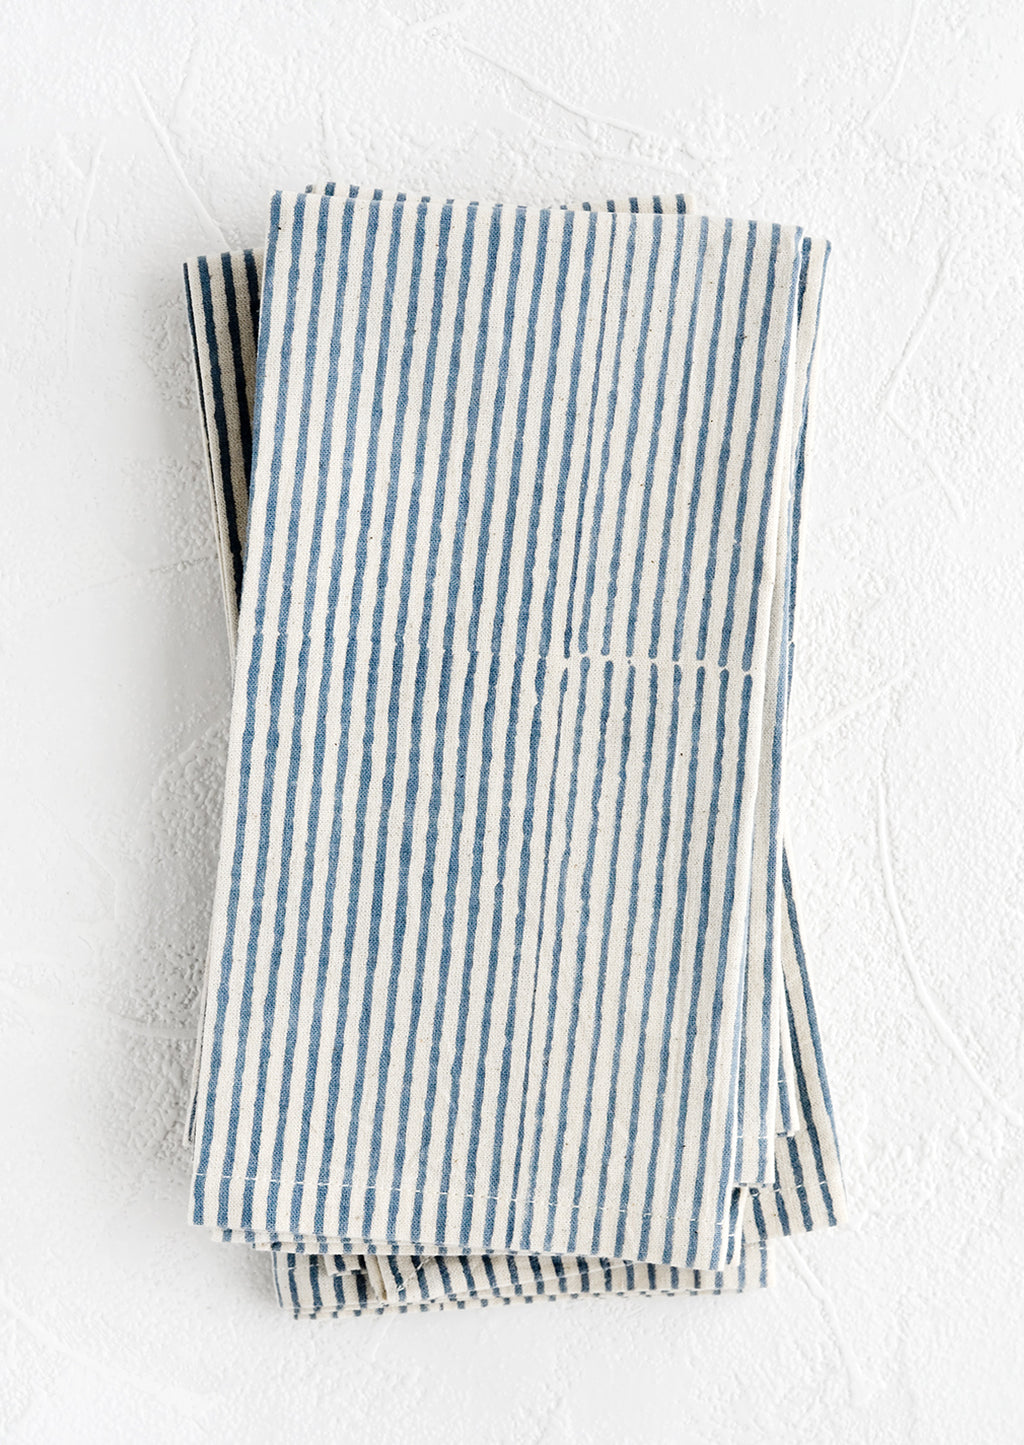 Indigo Stripe: A stack of folded fabric napkins in natural cotton with hand-drawn line pattern in indigo.